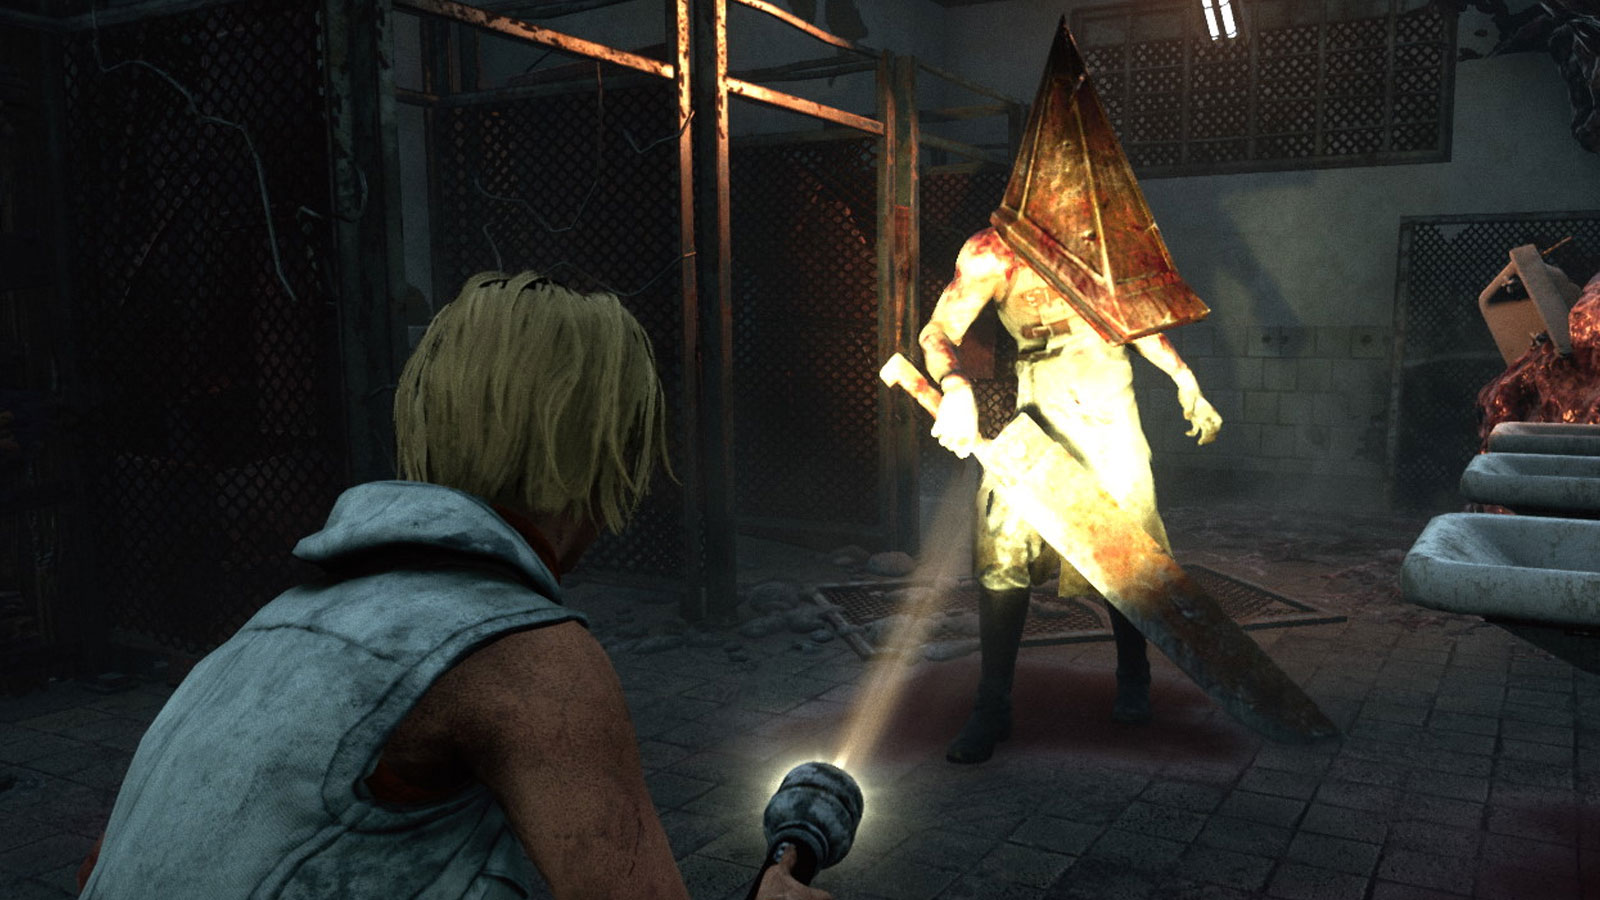  Silent Hill 2 (PS5) : Video Games